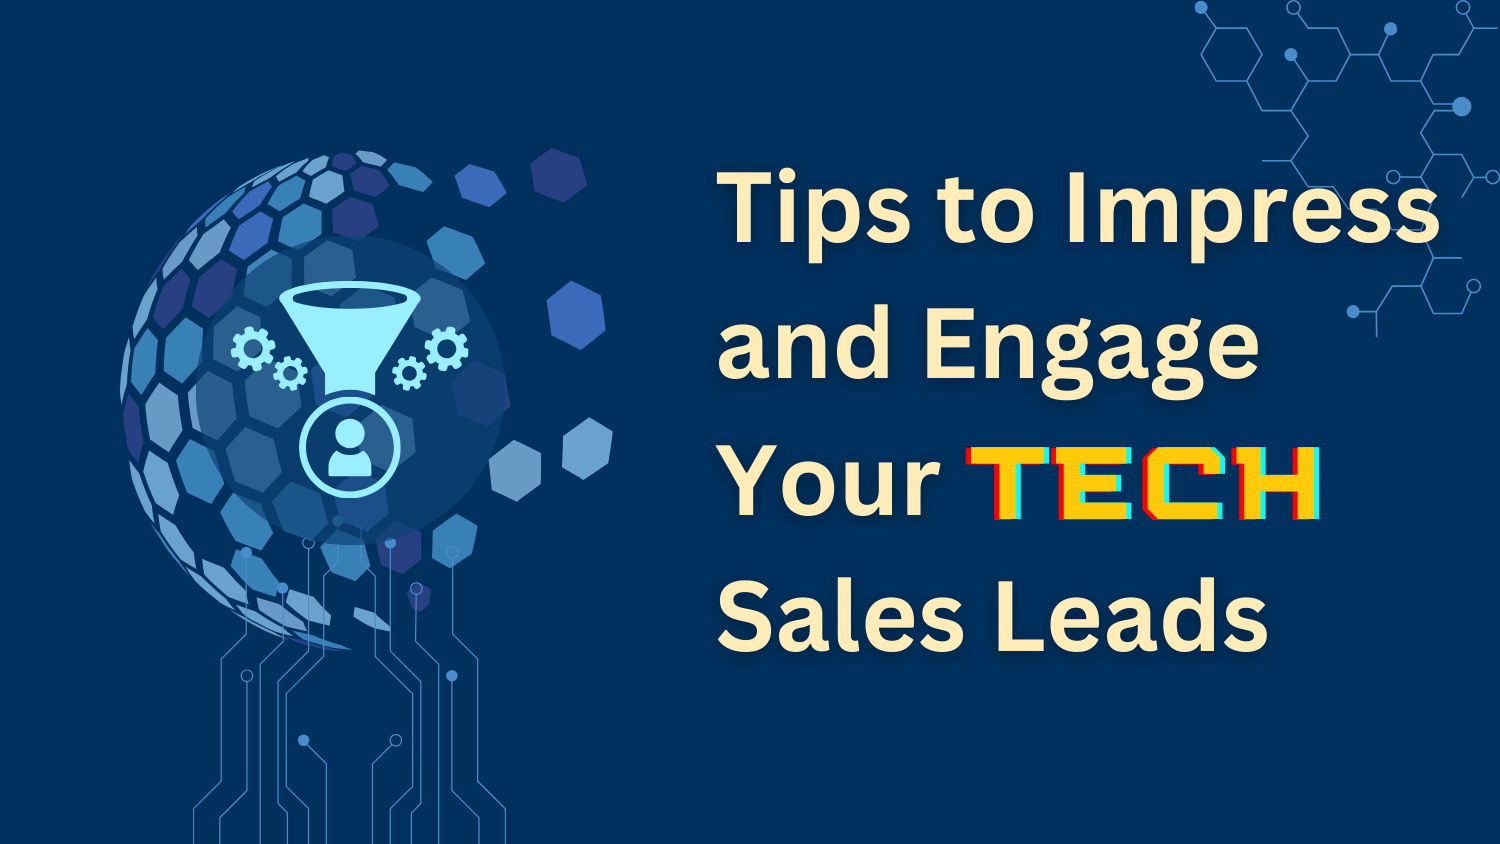 Tips to Impress and Engage Your Technology Sales Leads